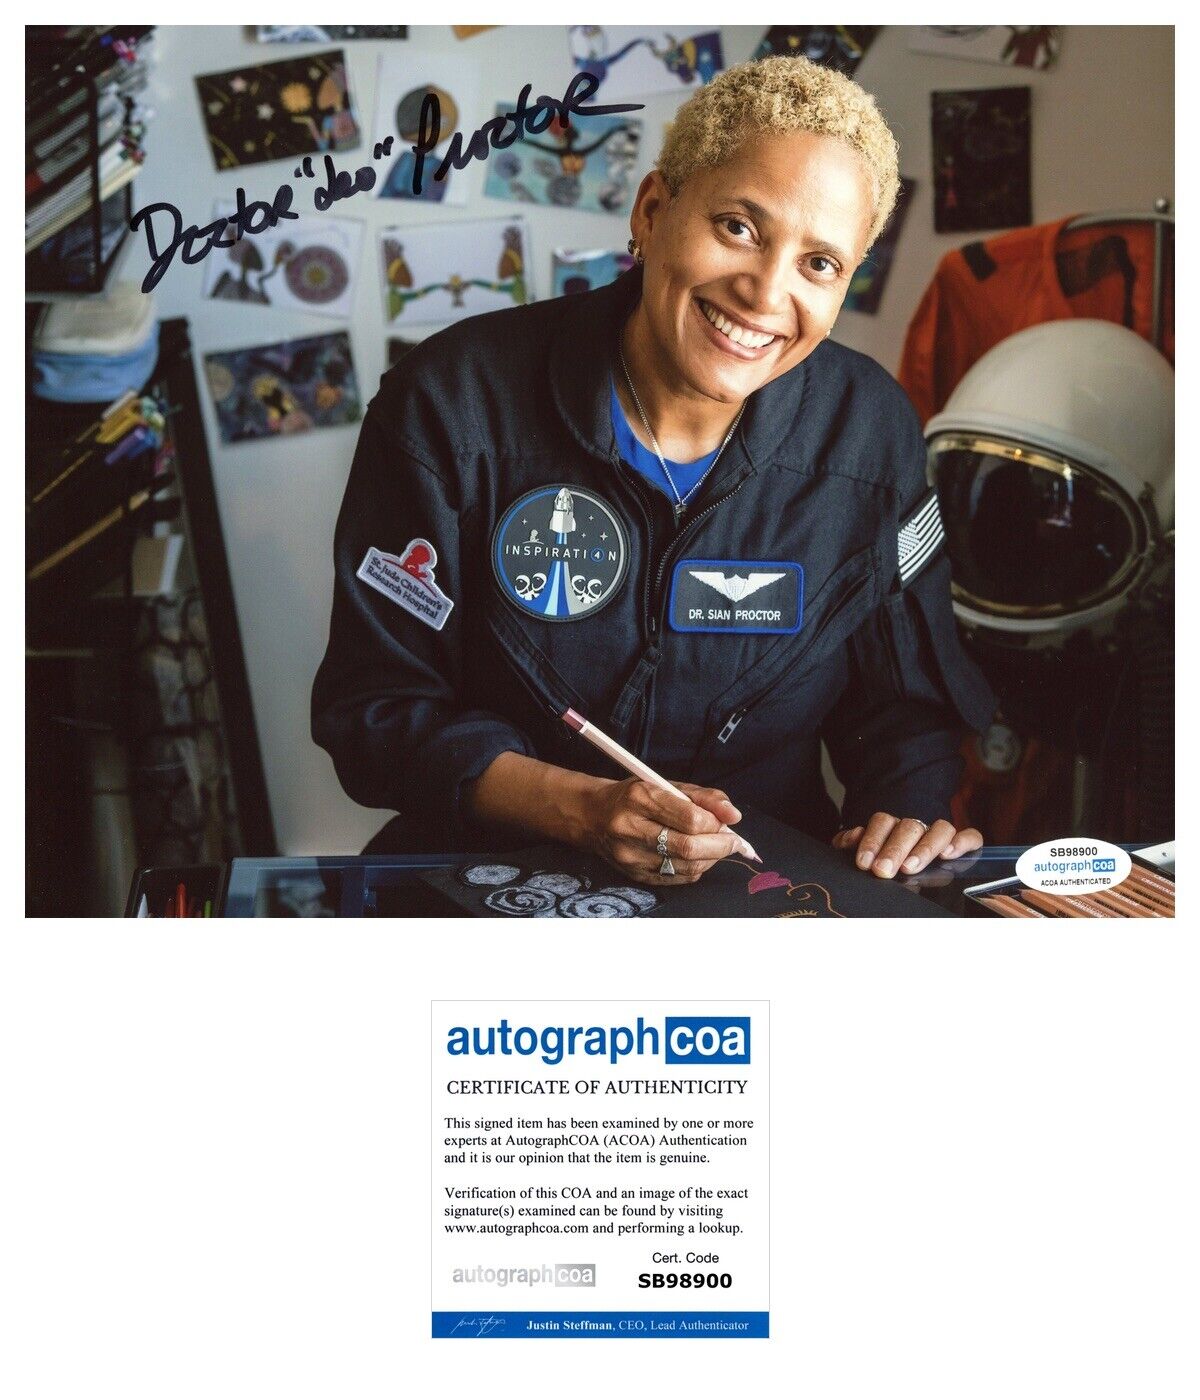 Sian Proctor Astronaut Signed Autographed 8x10 Photo ACOA Rare SpaceX Mission